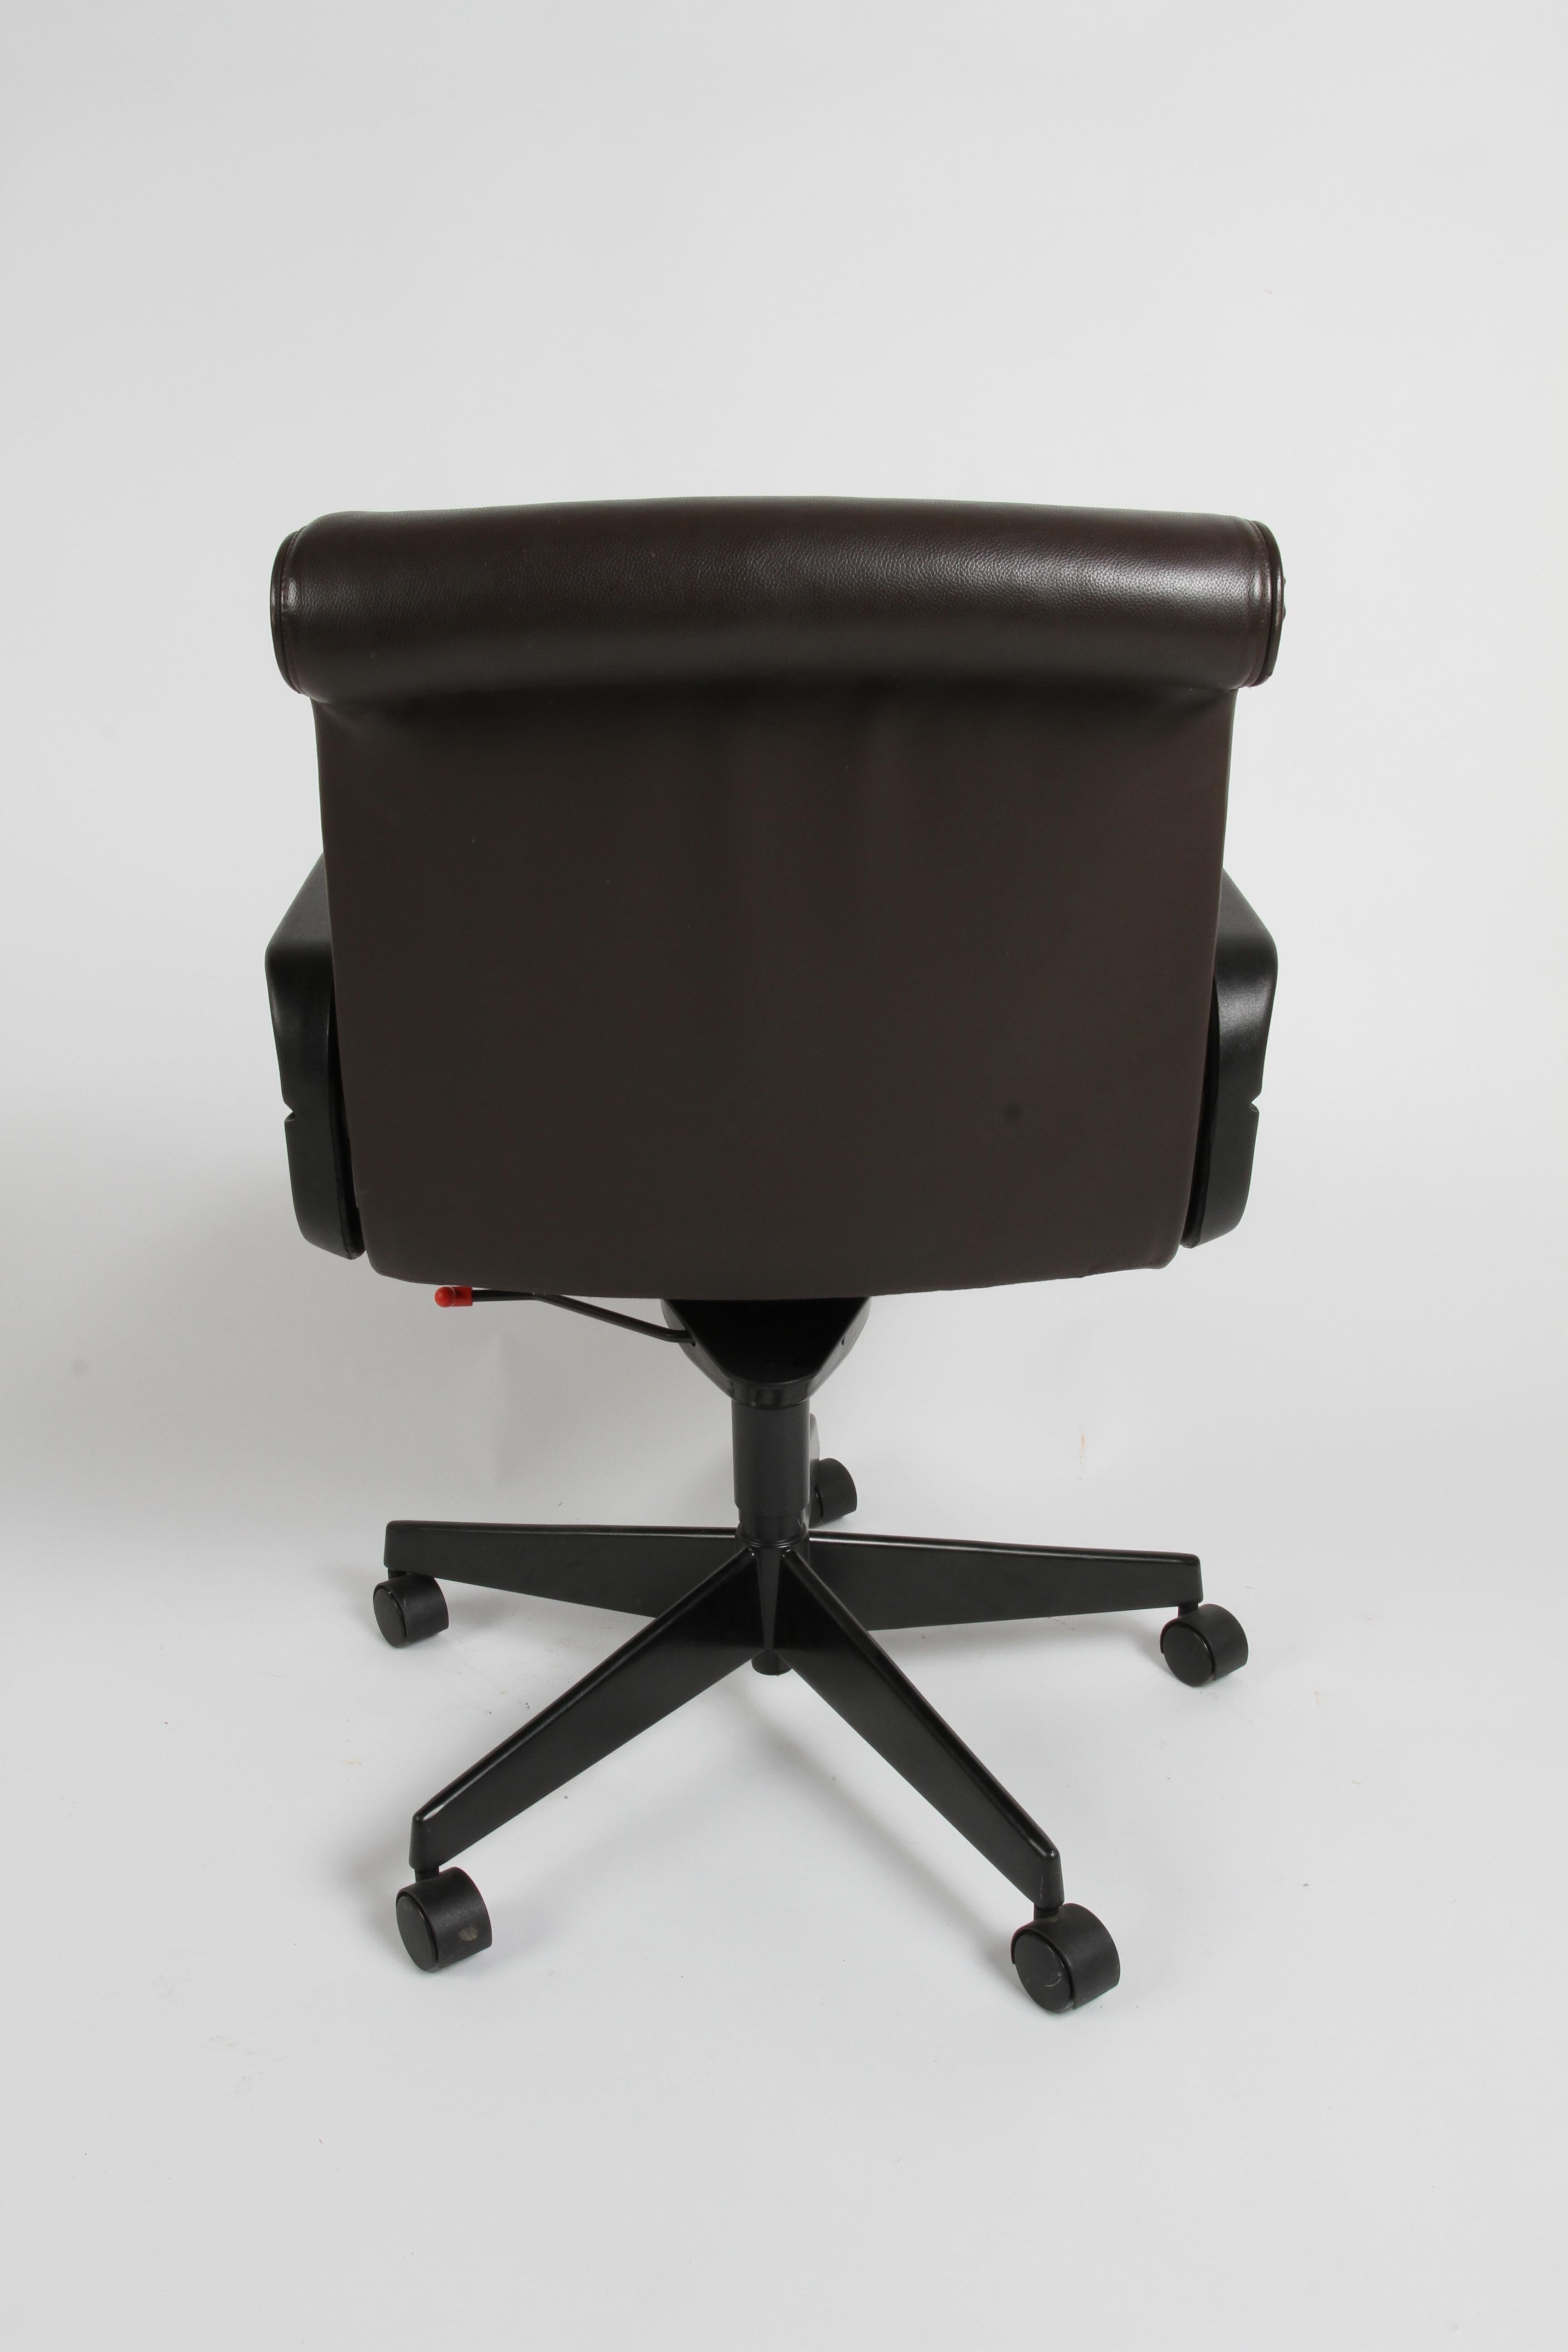 Richard Sapper for Knoll Desk Task Executive or Conference Chair - Brown Leather For Sale 2